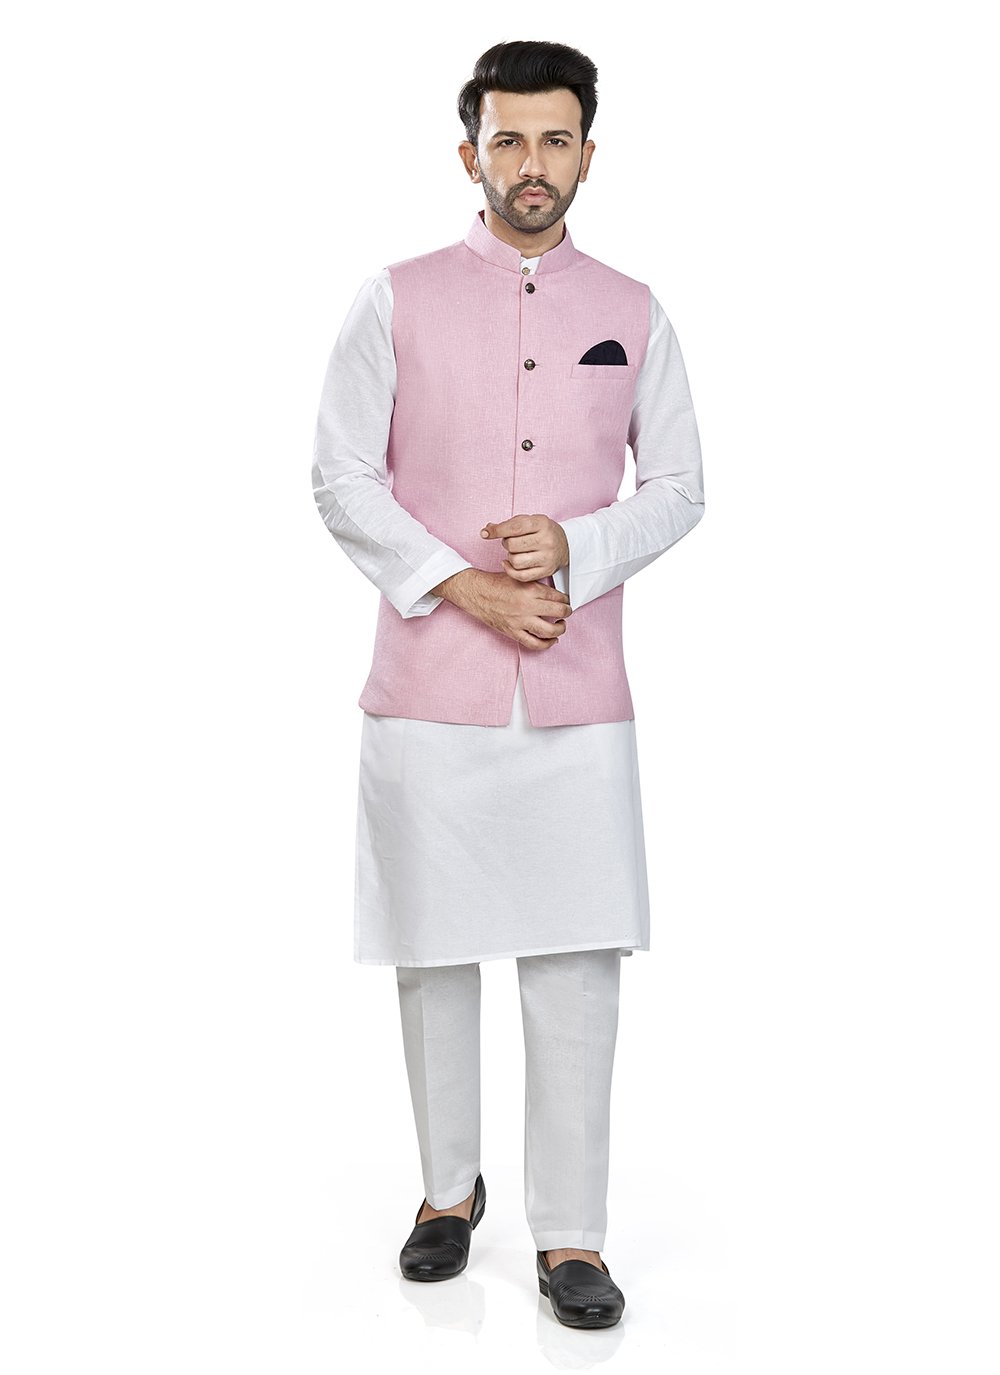 Linen Kurta Payjama With Jacket in Pink and White